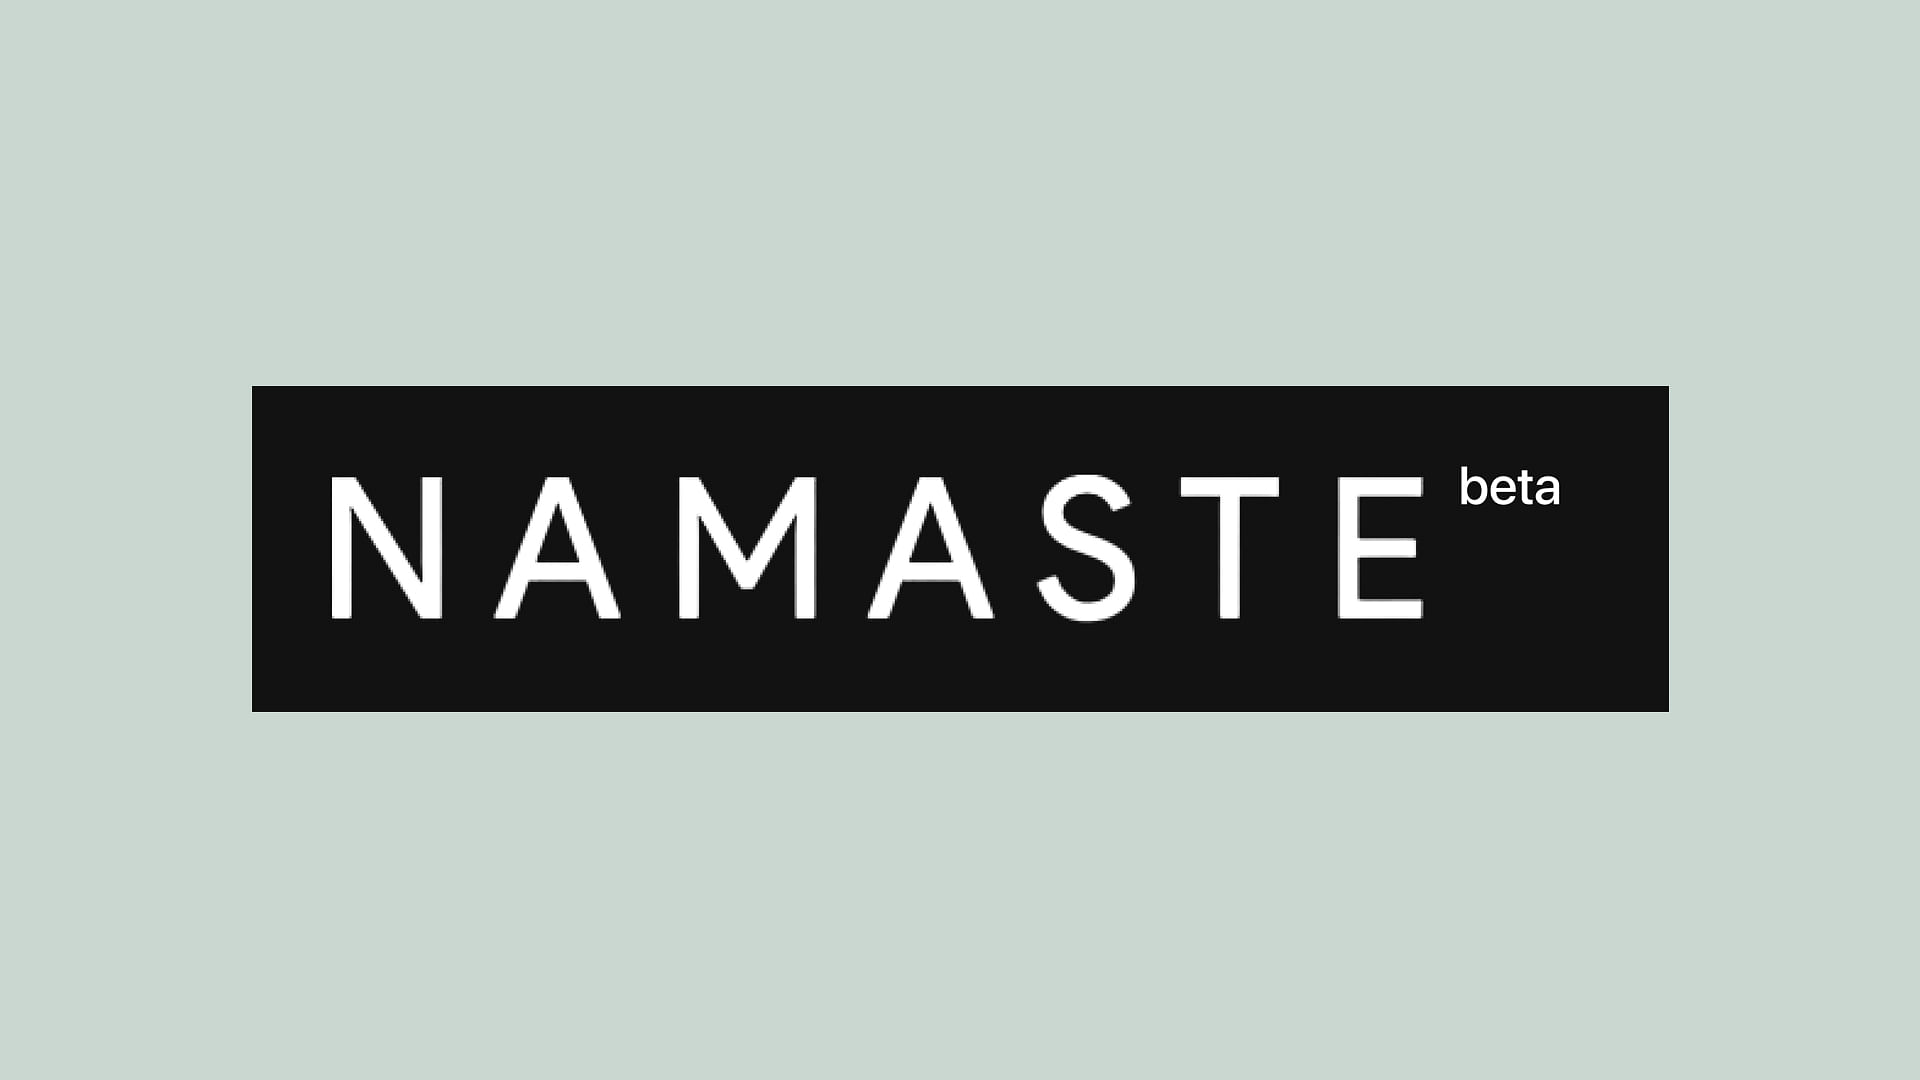 Say Namaste is a video chat platform created by an Indian startup from Mumbai.